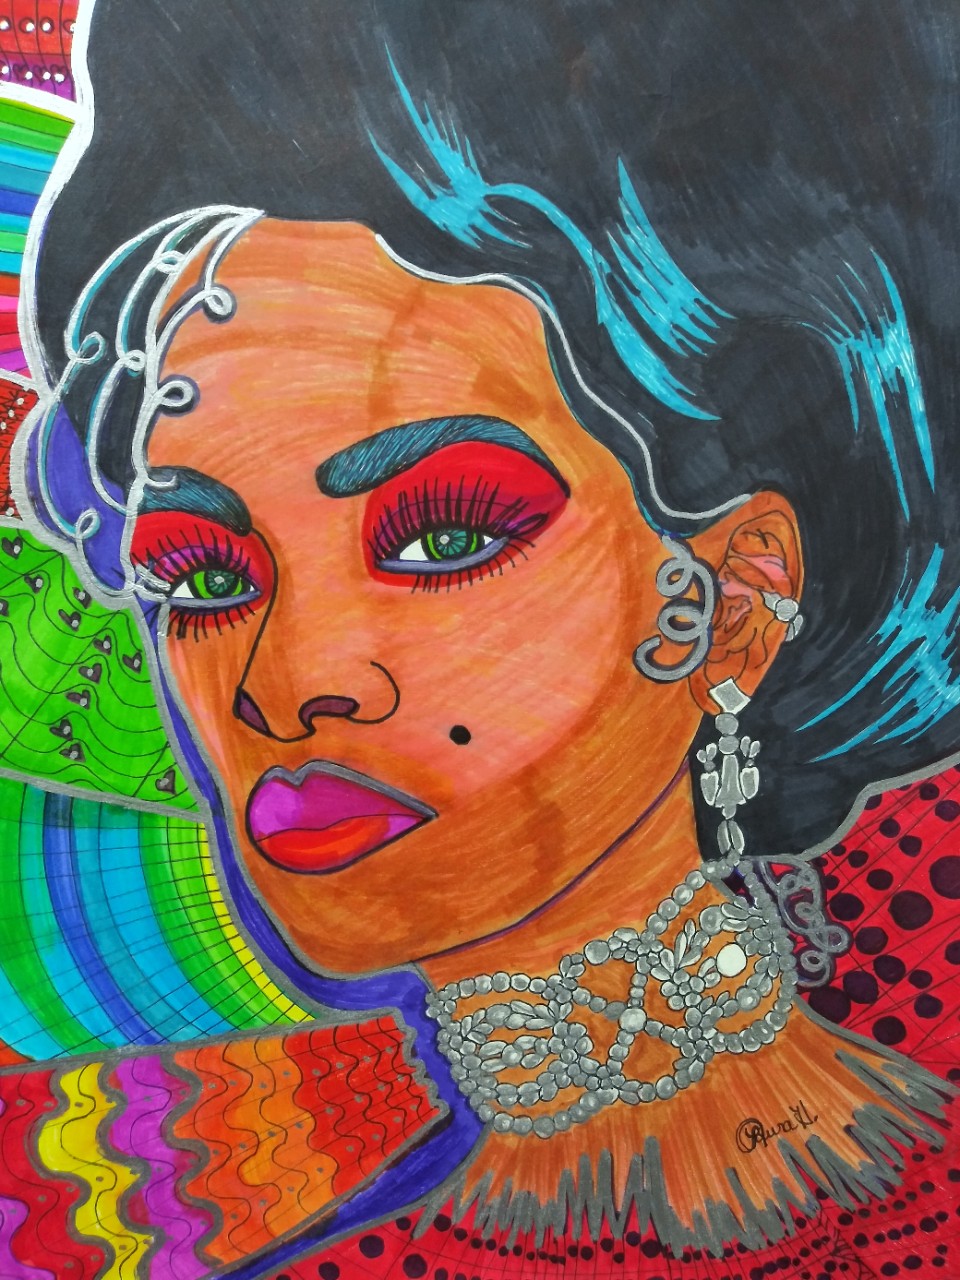 A lovely, colorful sort of abstract portrait of a woman’s face, hair and neck. Her hair is black and wavy and shown up and elegant. She is wearing diamond intricate earrings and a necklace. She has brown skin, heavy colorful makeup, and a serious, piercing look at the viewer. The background is a combination of patterns and bright colors. 